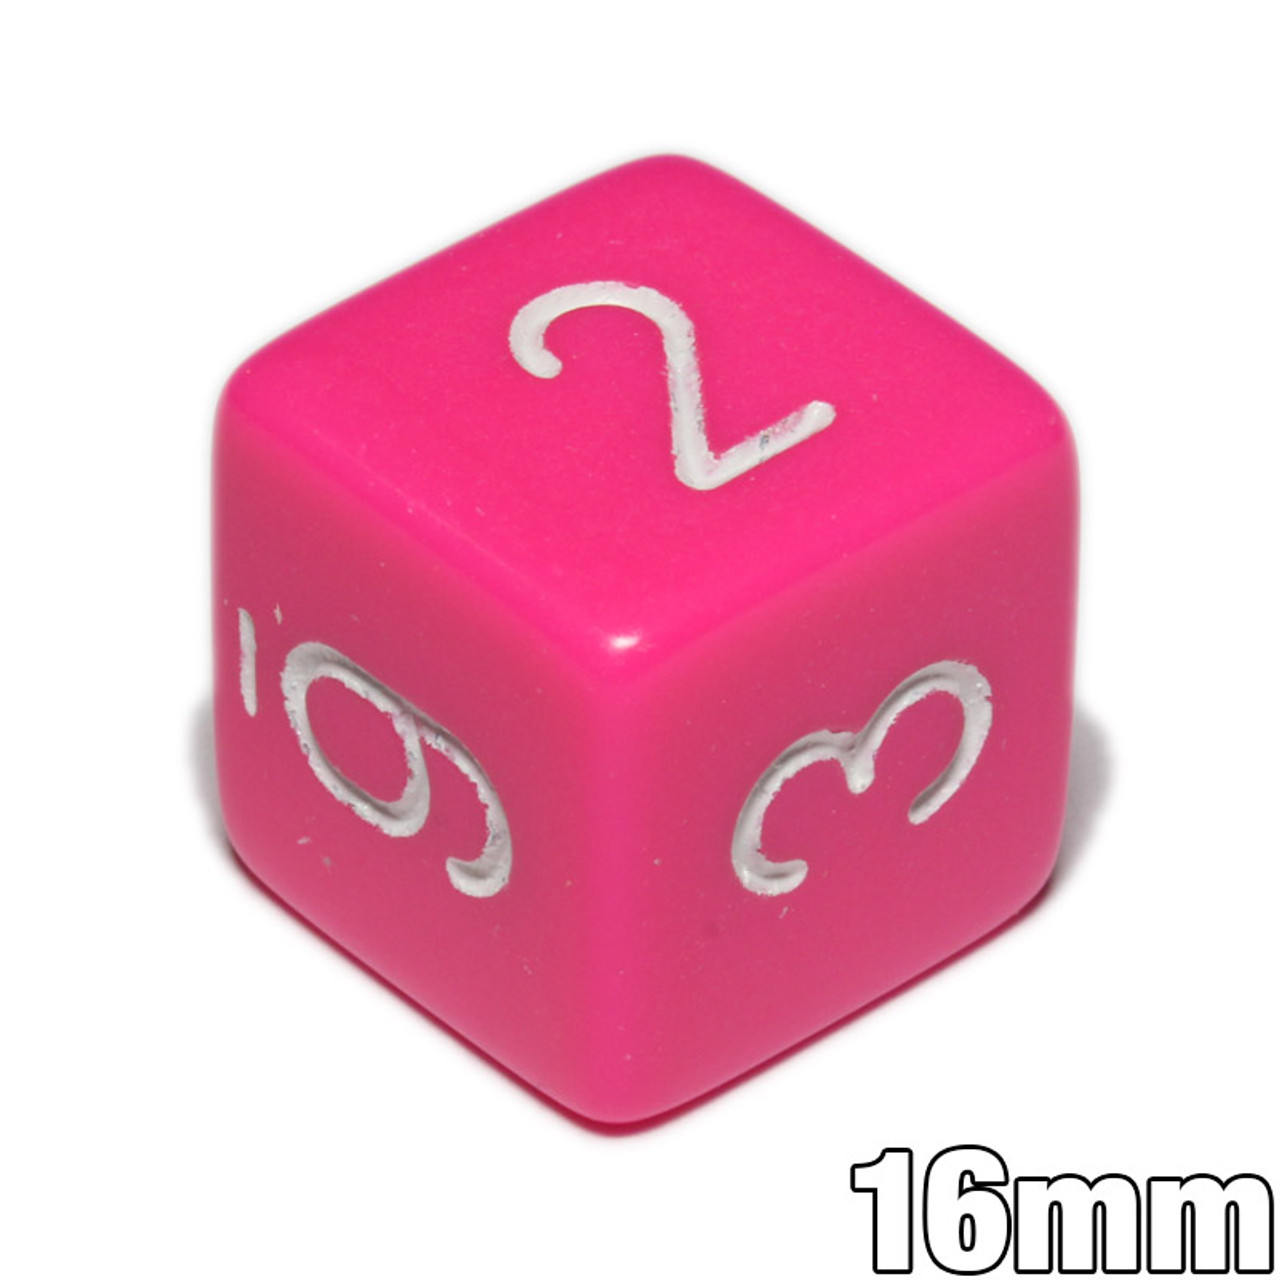 NEW 12 ASSORTED OPAQUE DICE 16mm PINK AND PURPLE 6 OF EACH COLOR FREE SHIPPING 